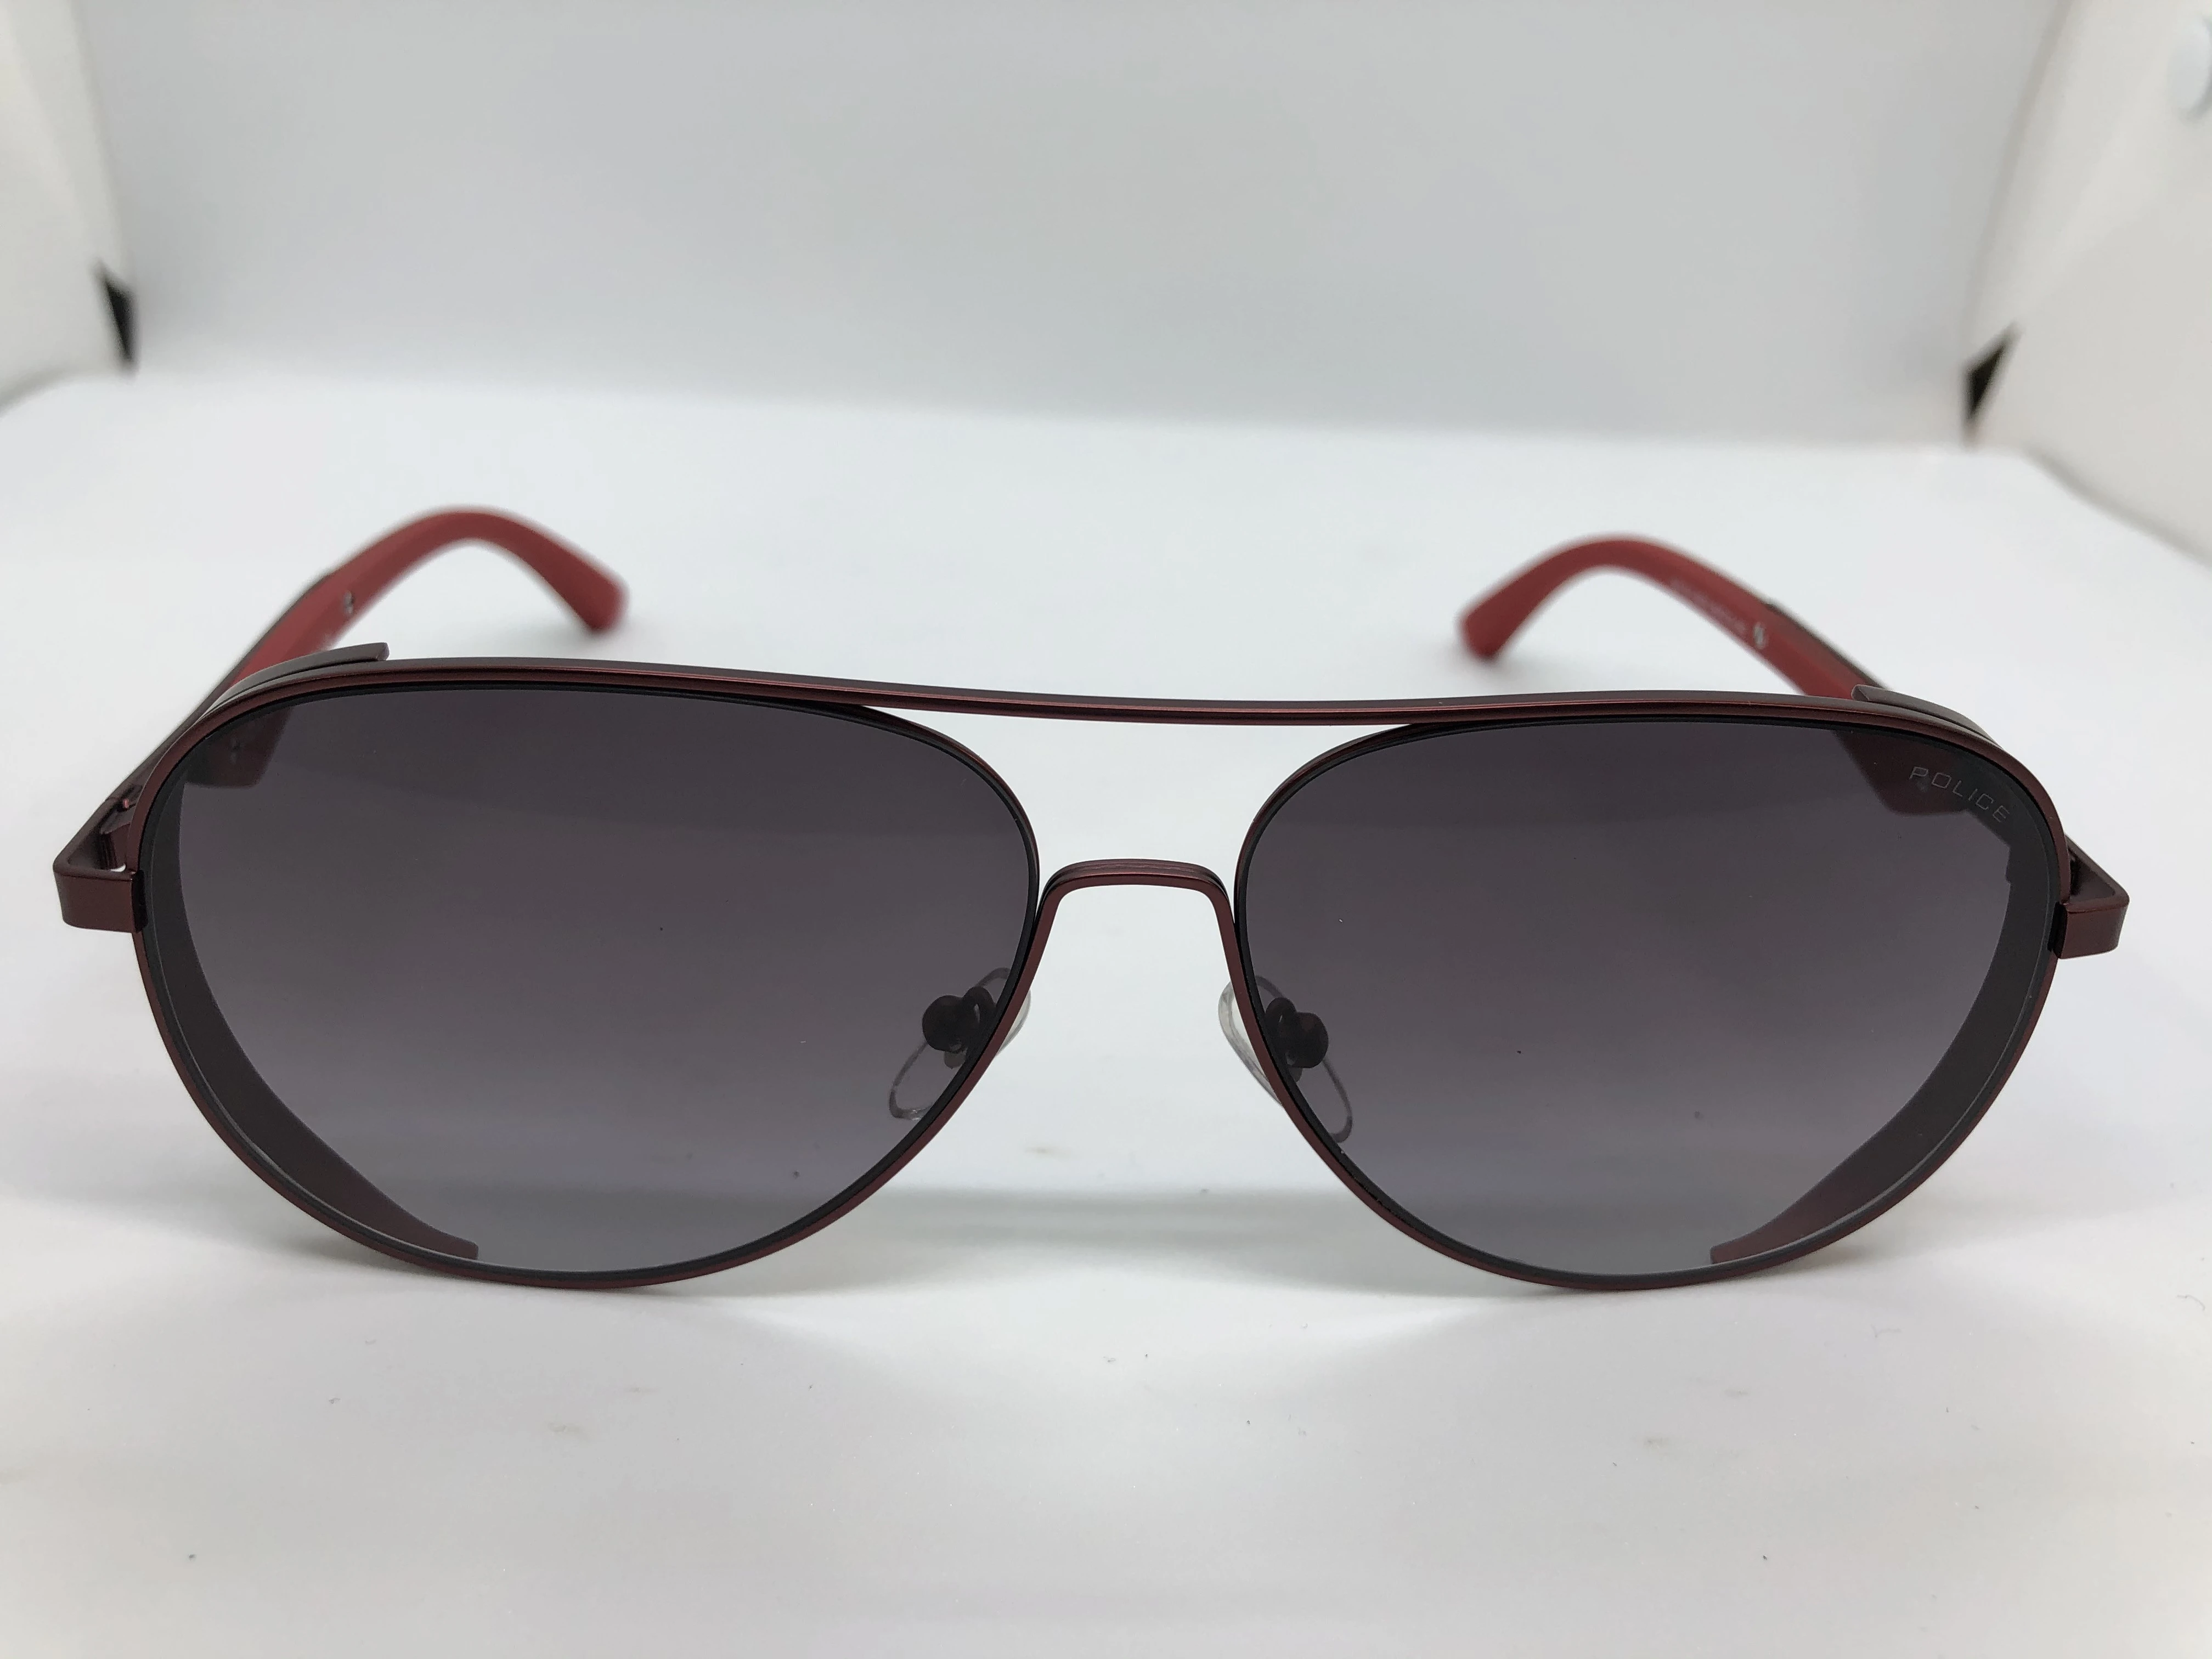 Sunglasses - from POLICE - burgundy with matte metal frame - tinted lenses - brown polycarbonate matte and metal frame - with silver logo - men